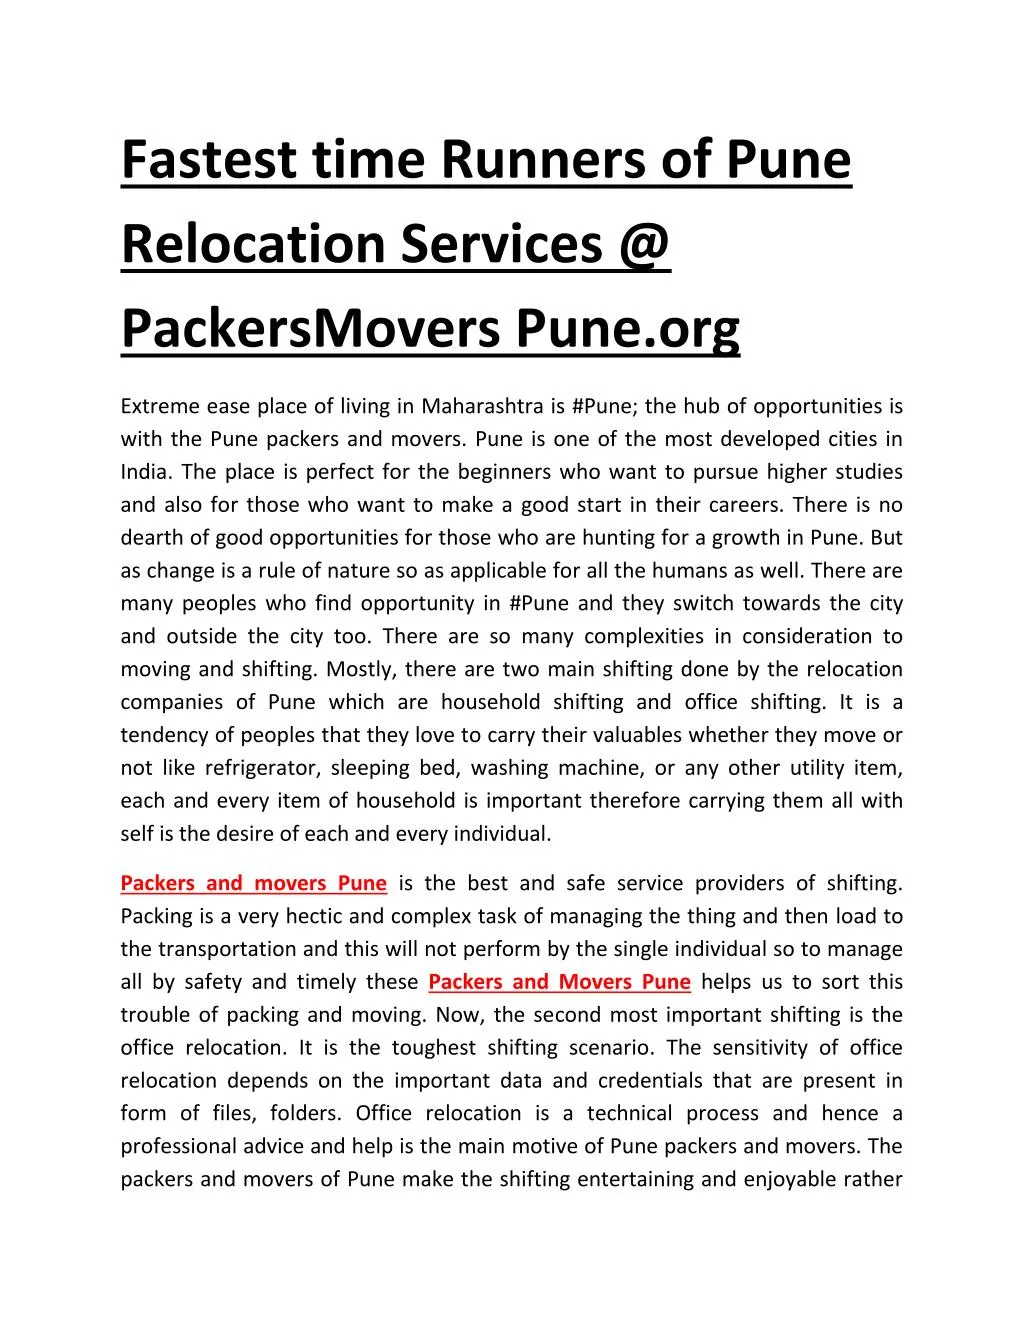 fastest time runners of pune relocation services